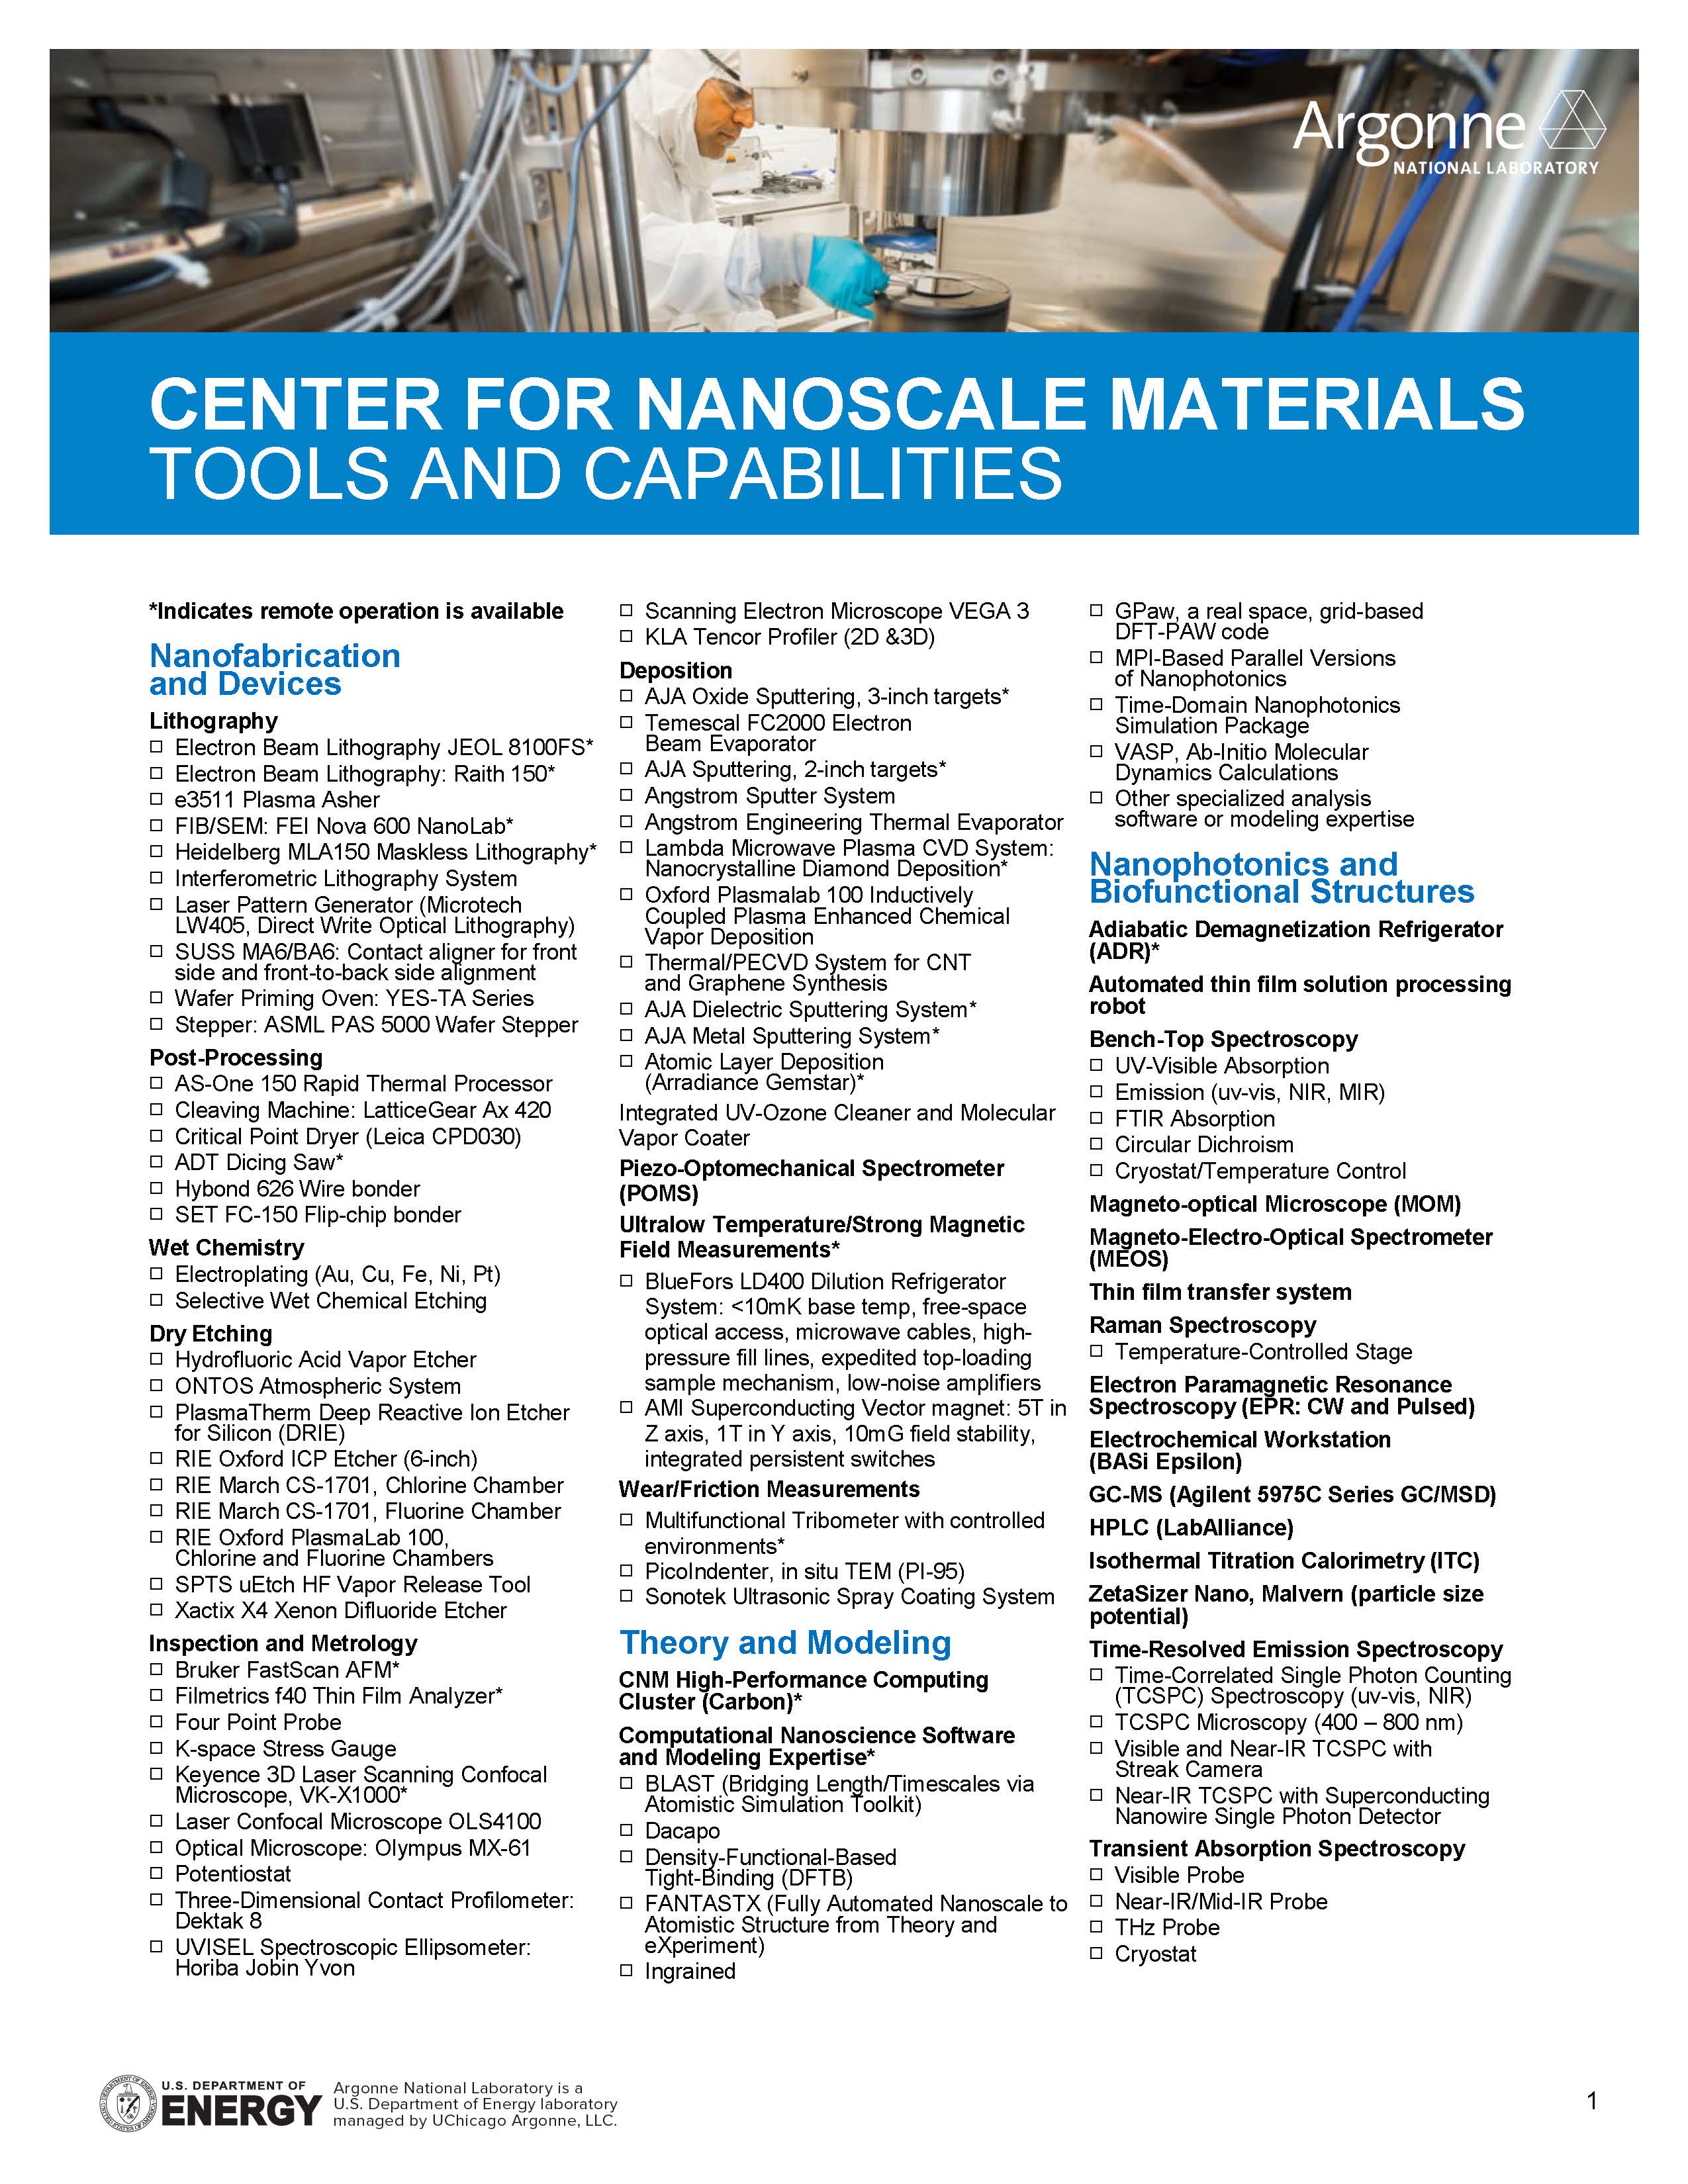 CNM Tools and Capabilities Page 1